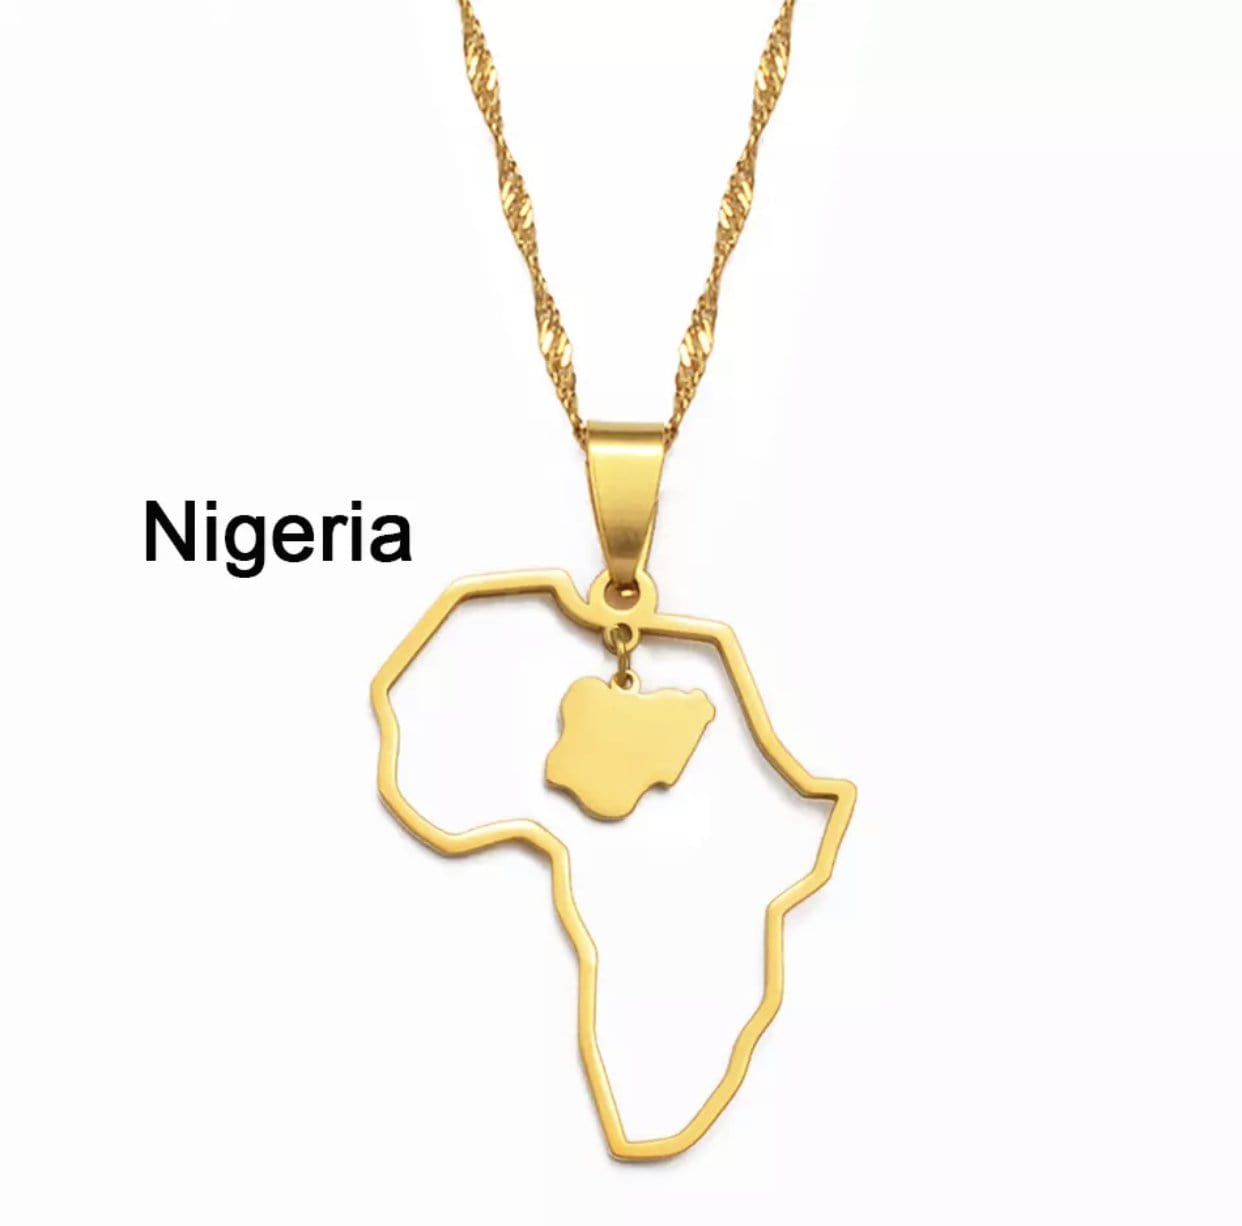 Veryldesigns Necklace Nigeria Custom African country Necklace